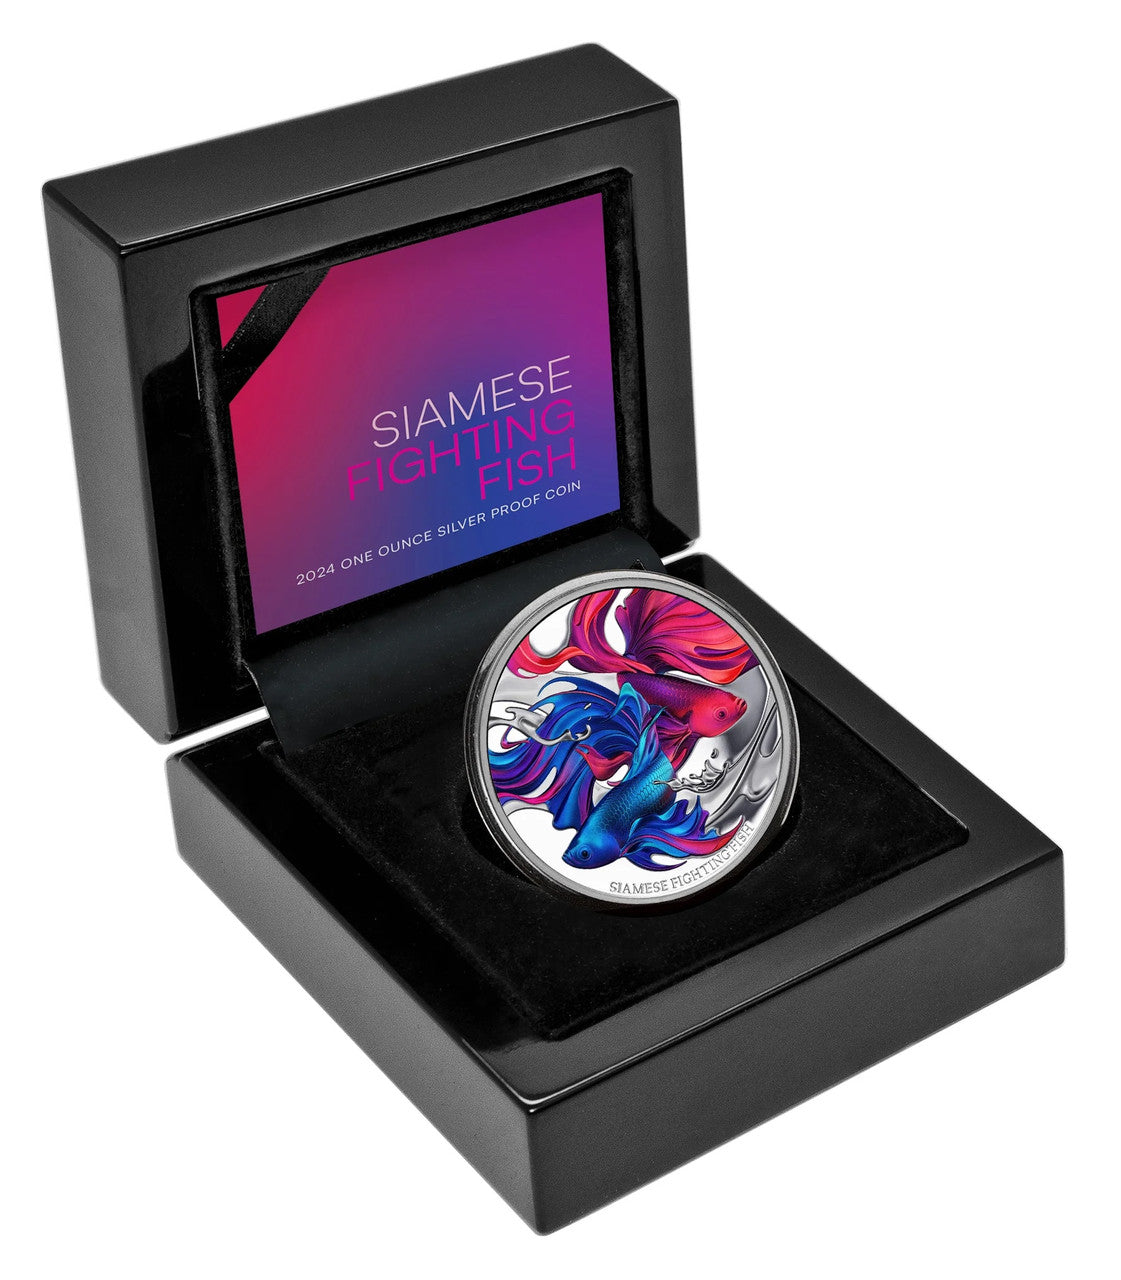 Siamese Fighting Fish 2024 $1 1 oz Silver Proof Coin